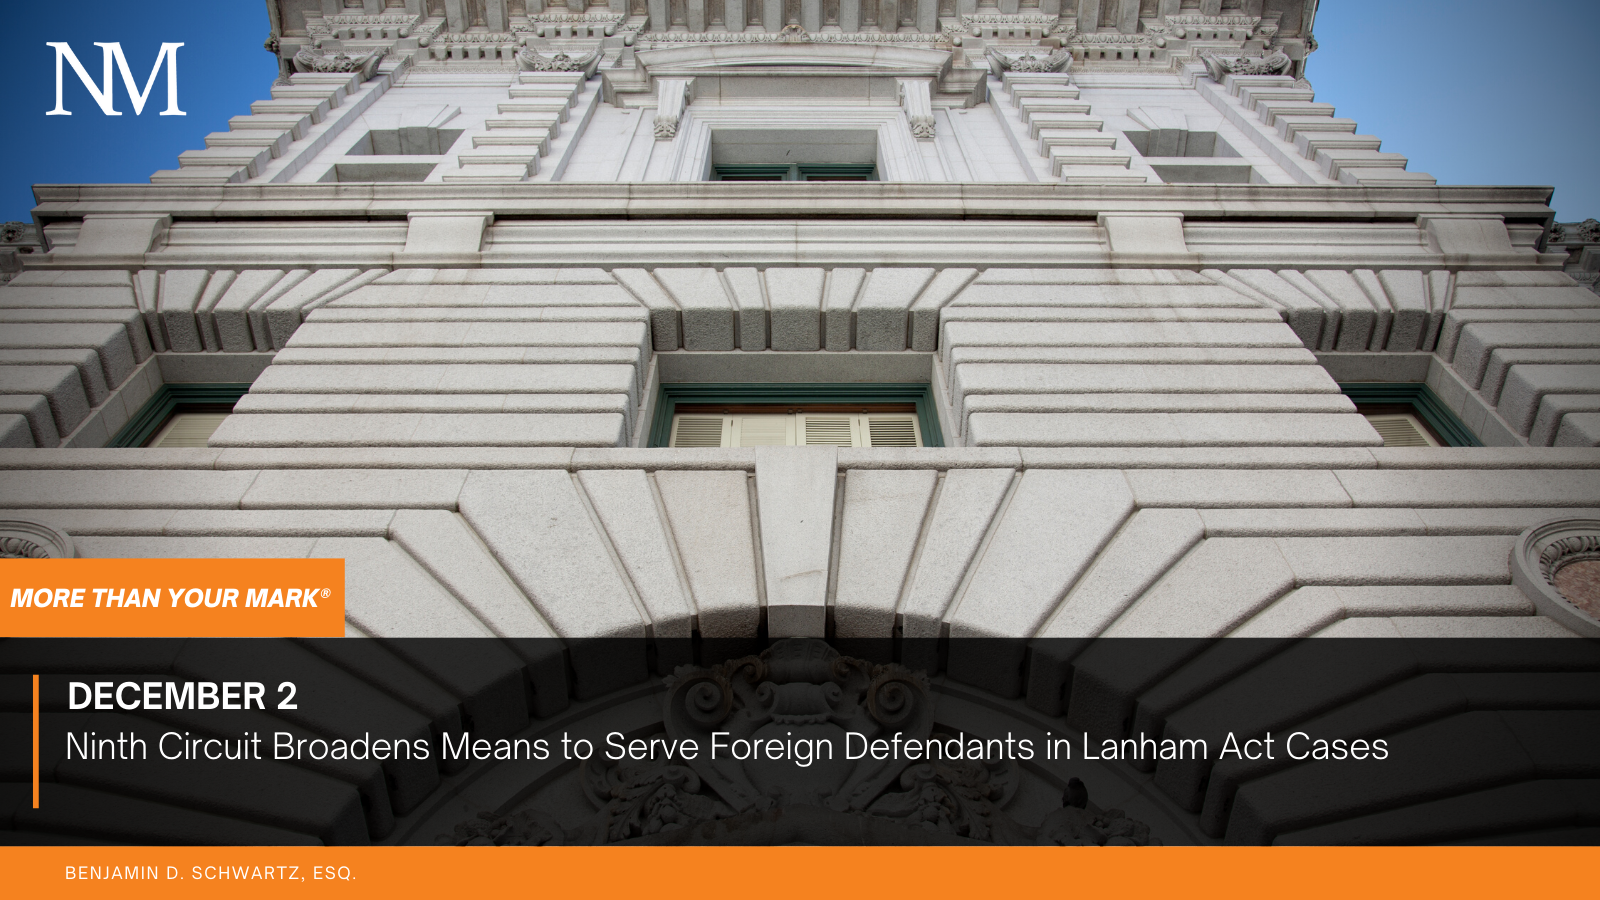 Ninth Circuit Broadens Means to Serve Foreign Defendants in Lanham Act Cases